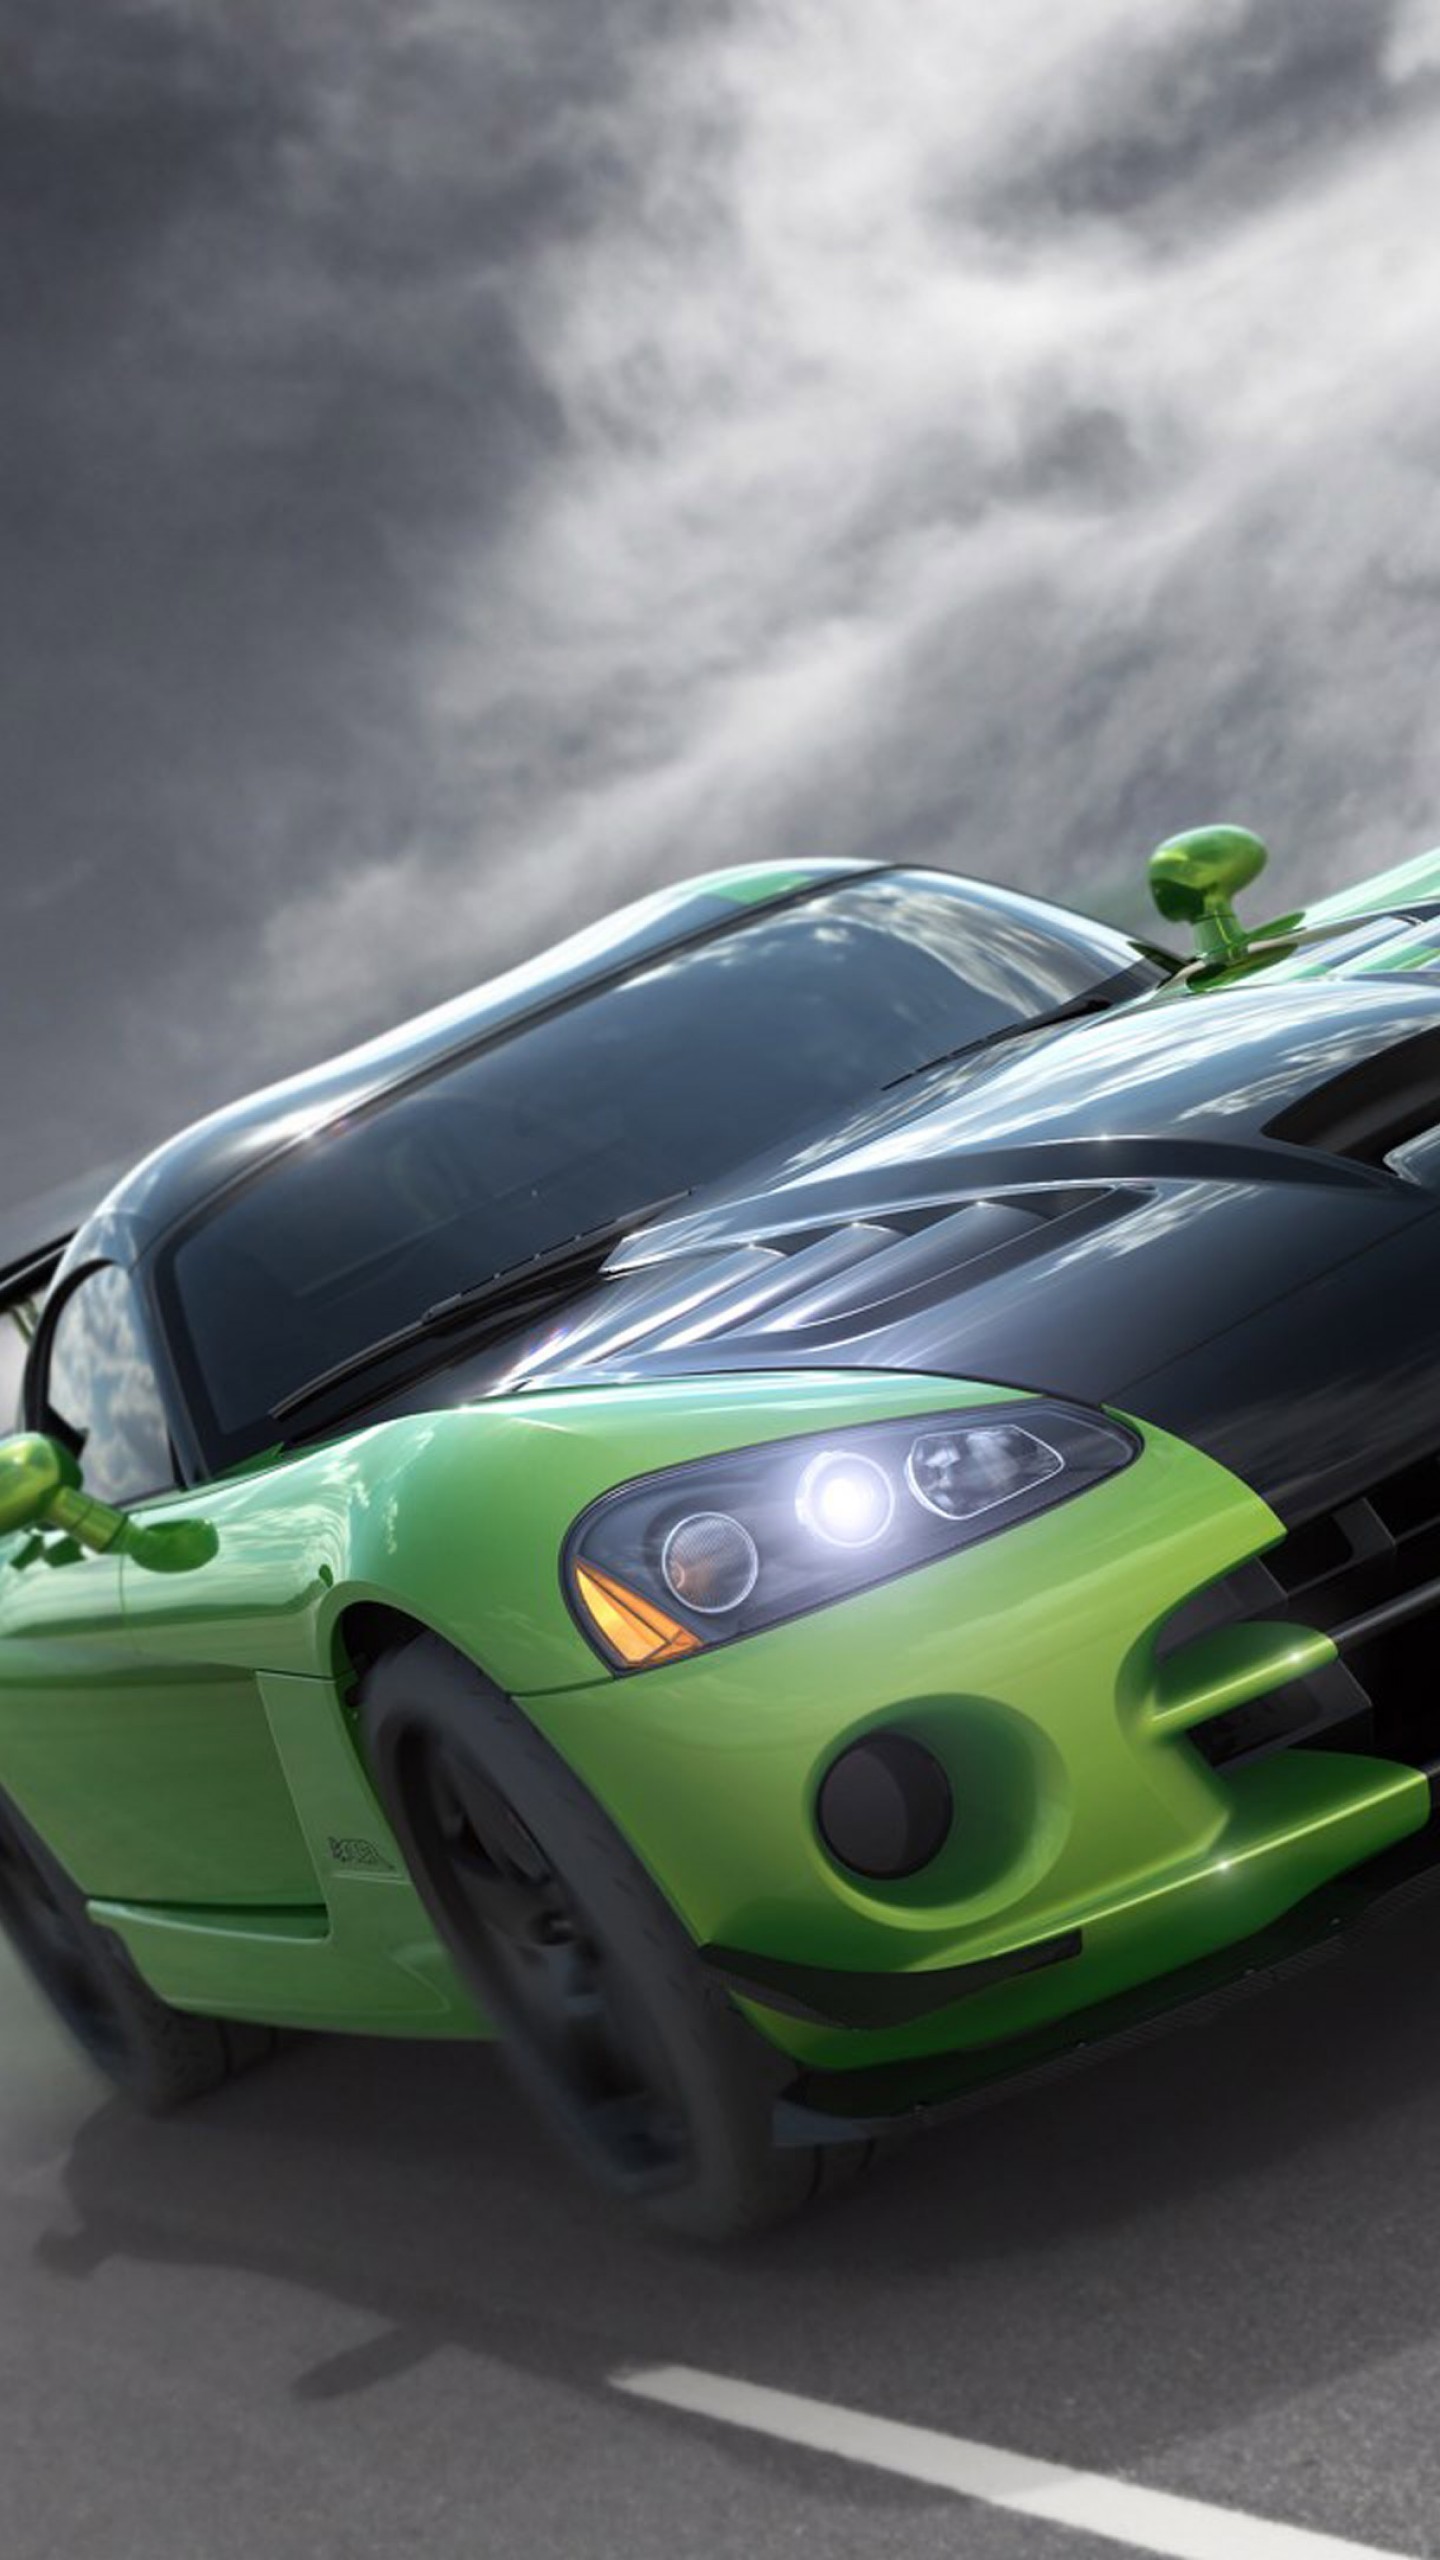 Your Ridiculously Awesome Dodge Viper Wallpapers Are Here